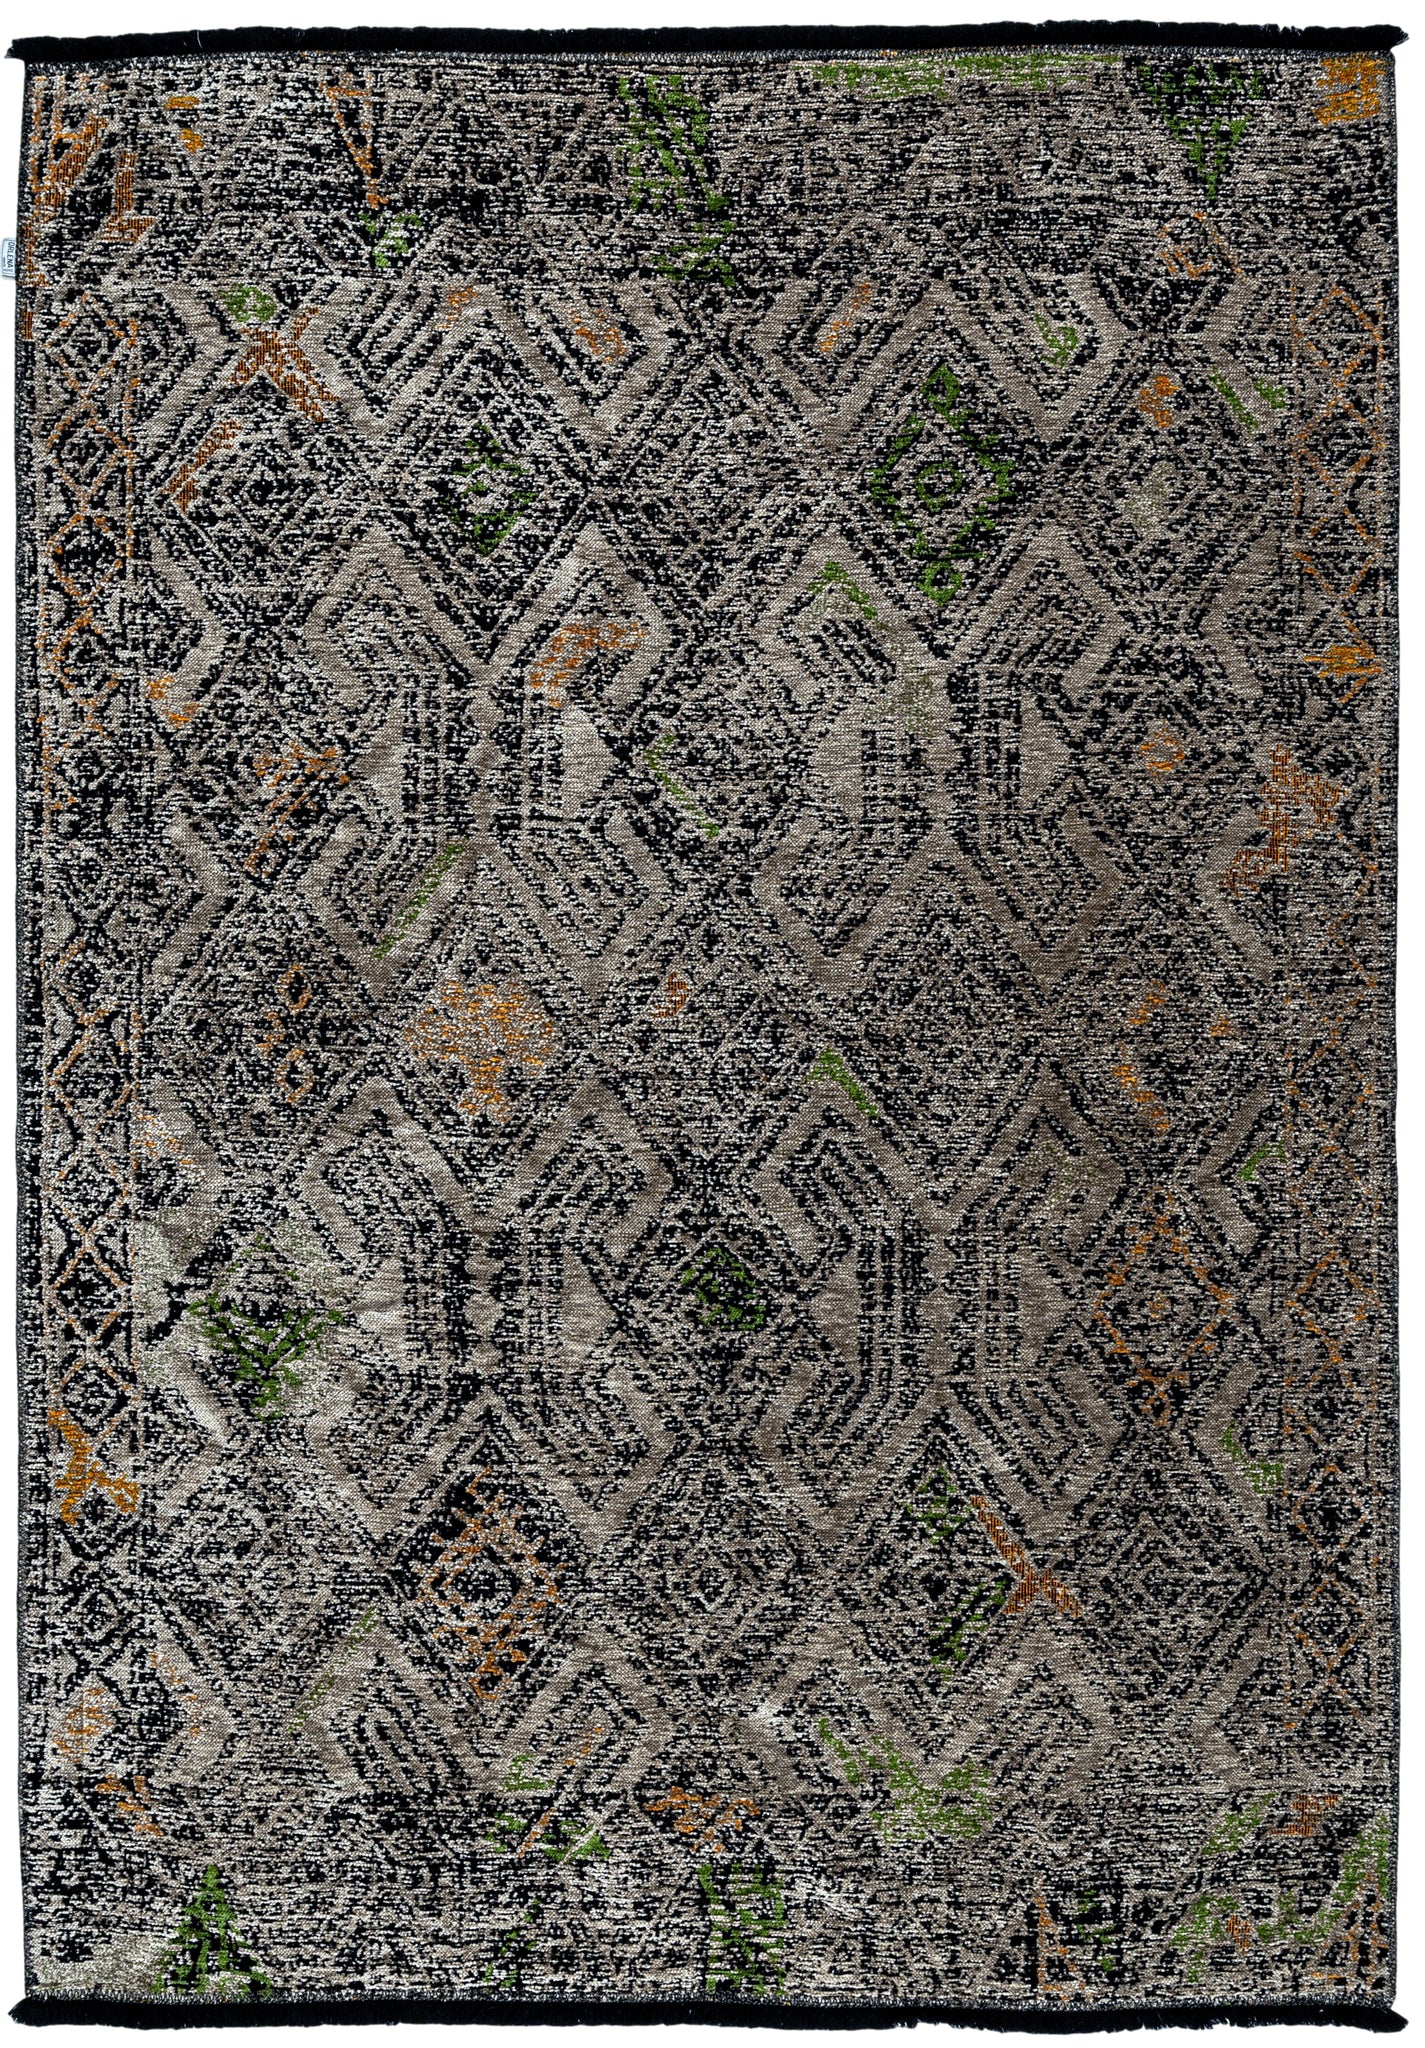 Washable Area rug | Simon & Yildirim Ease of Elegance Poppy | Light & Dark Multi-color Abstract | 8x10 | By MotherRuggers.com | Machine Washable | Jacquard Woven | Pet Friendly | Kid Friendly | Machine Wash | Line Dry | Living Room | Covered Patio | Entry Way | Bedroom | High-Traffic | Two year warranty with proper care | Shake or light Vacuum | Machine Wash as needed | Dry Flat or Line Dry | Dries fast